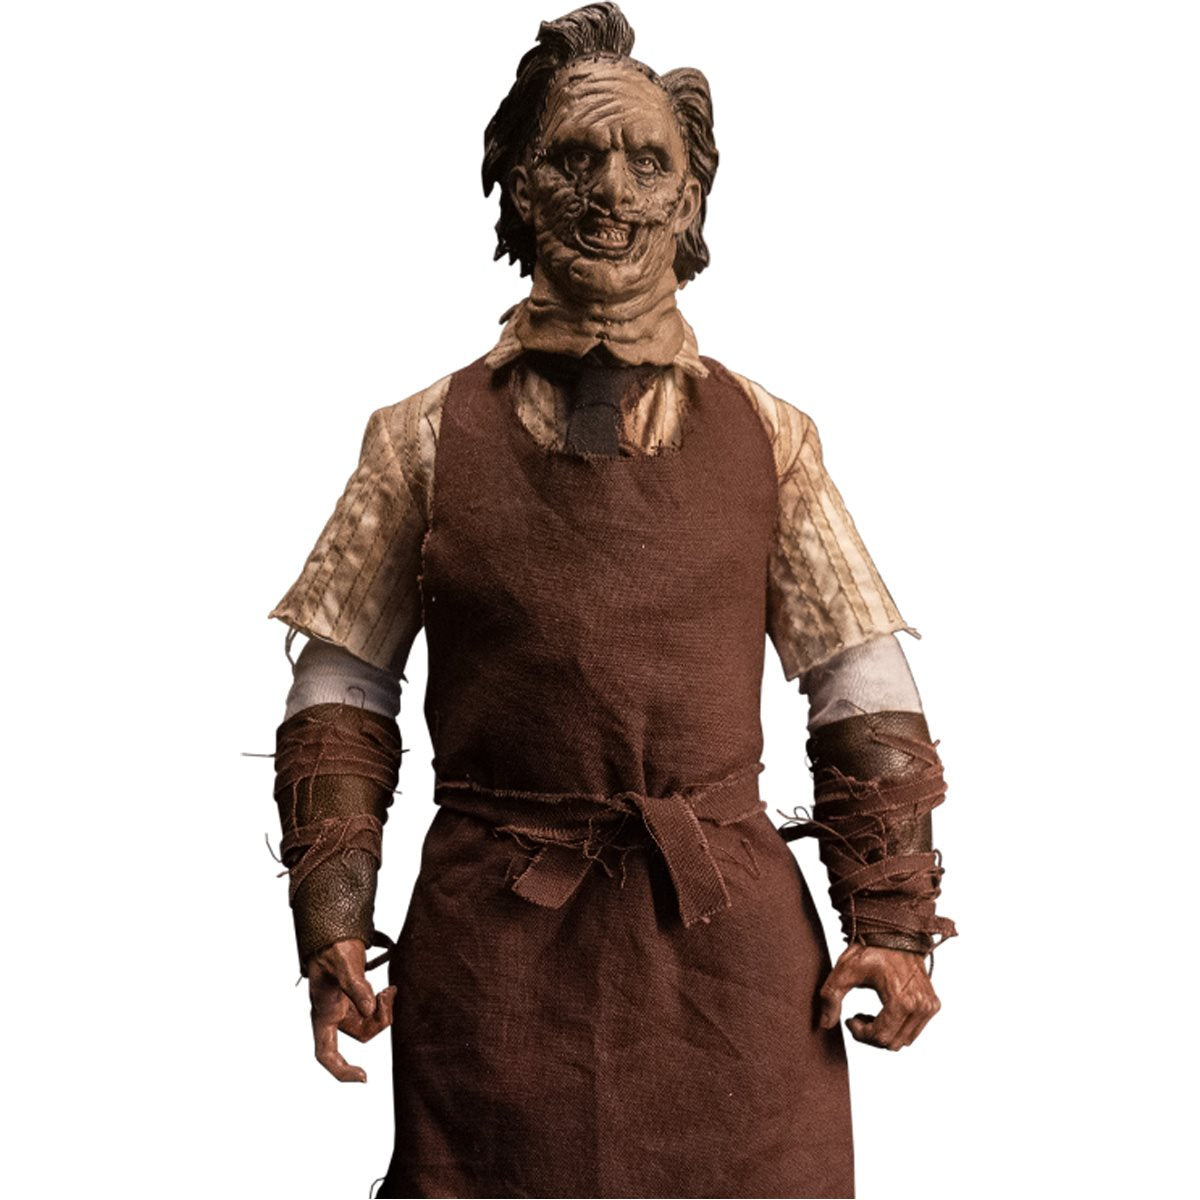 The Texas Chainsaw Massacre (2003) Leatherface 1:6 Scale Action Figure Trick or Treat Studios